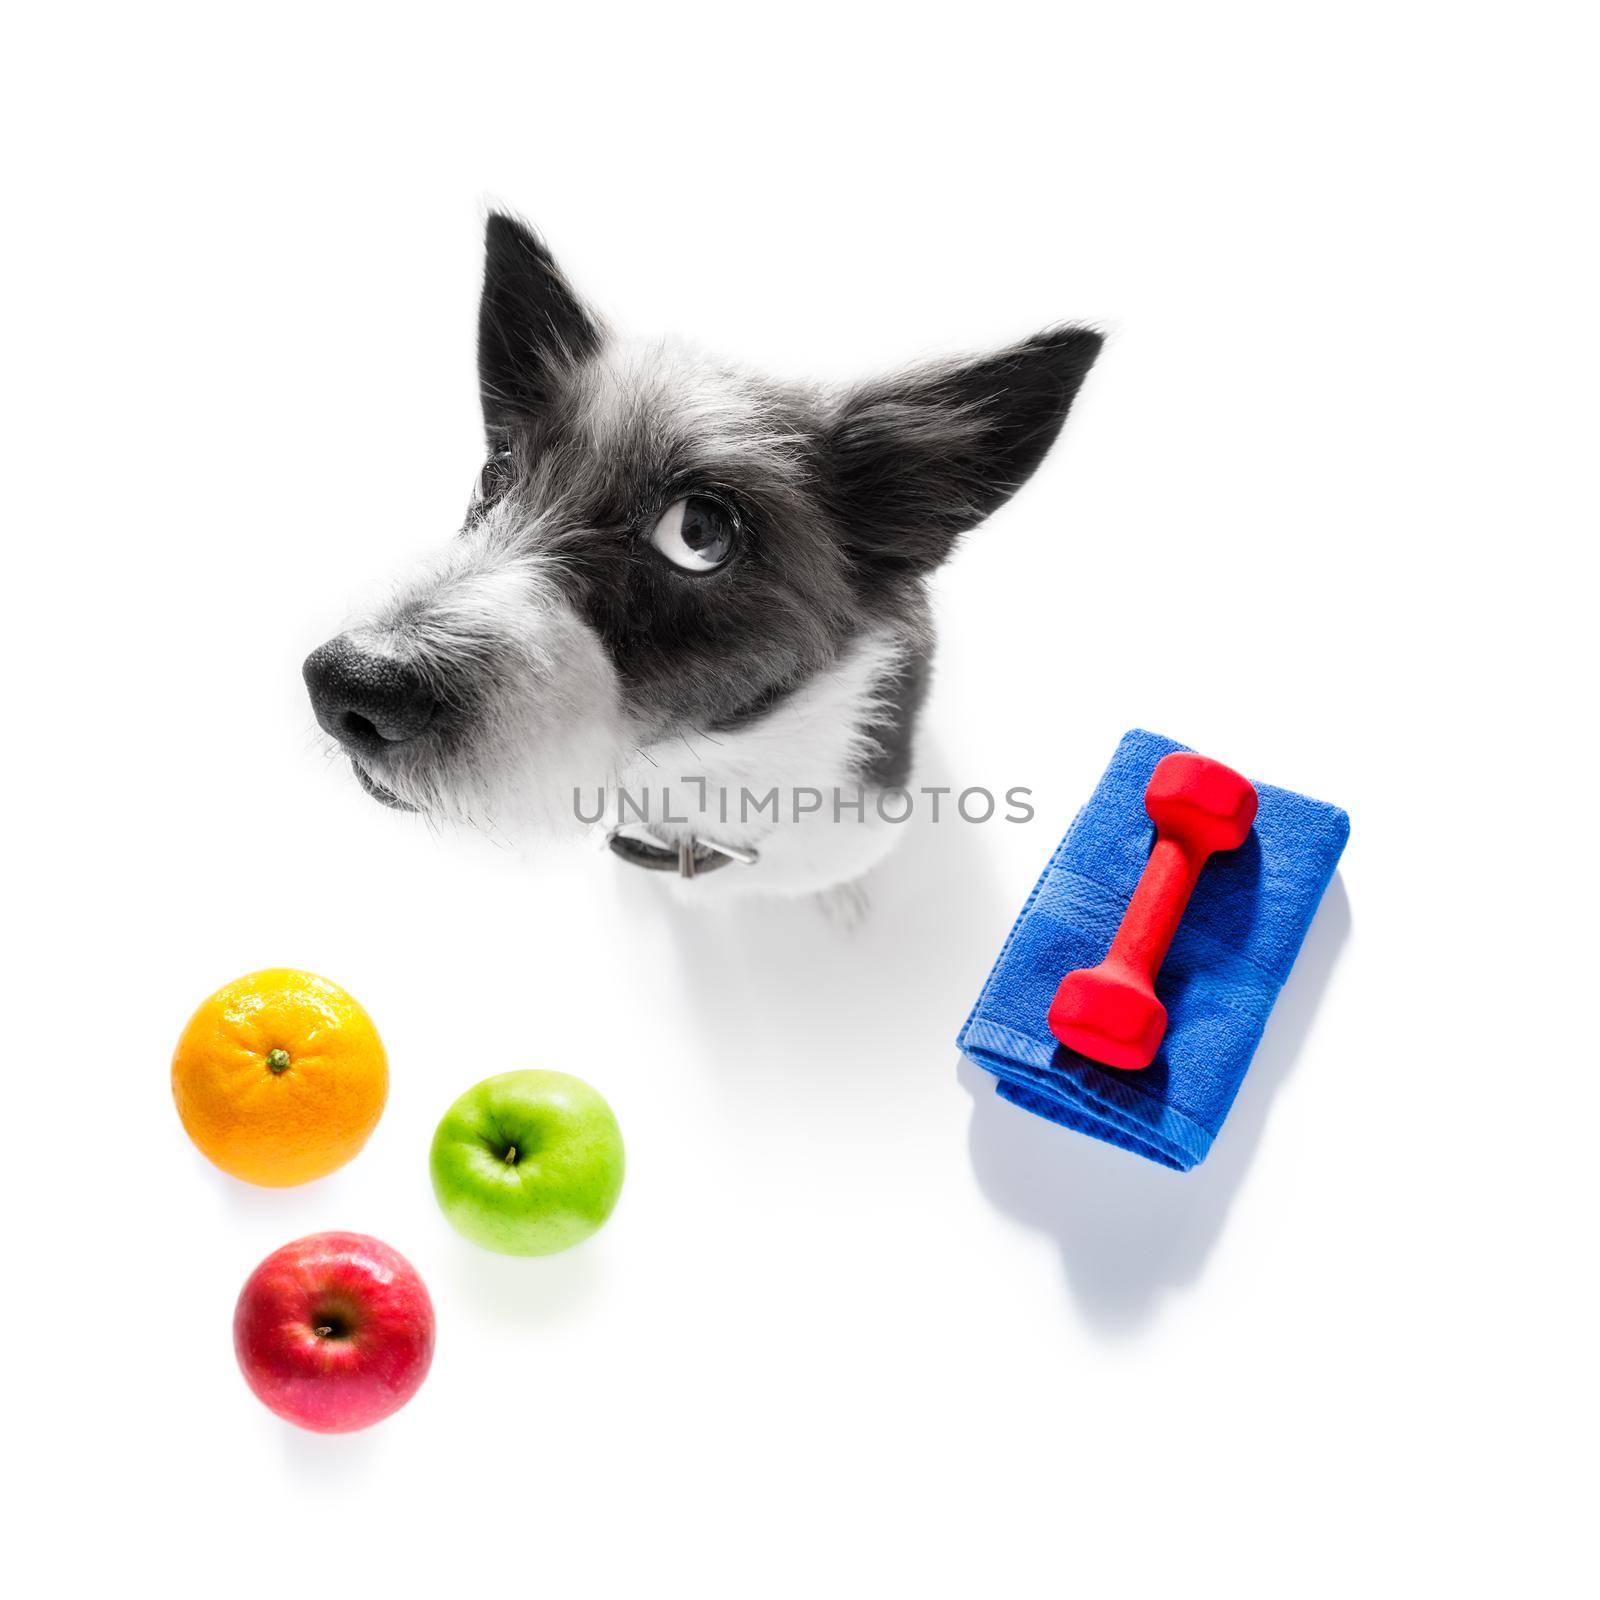 fitness poodle dog with  a heavy dumbbell, as personal trainer , isolated on white background with healthy food or fruit